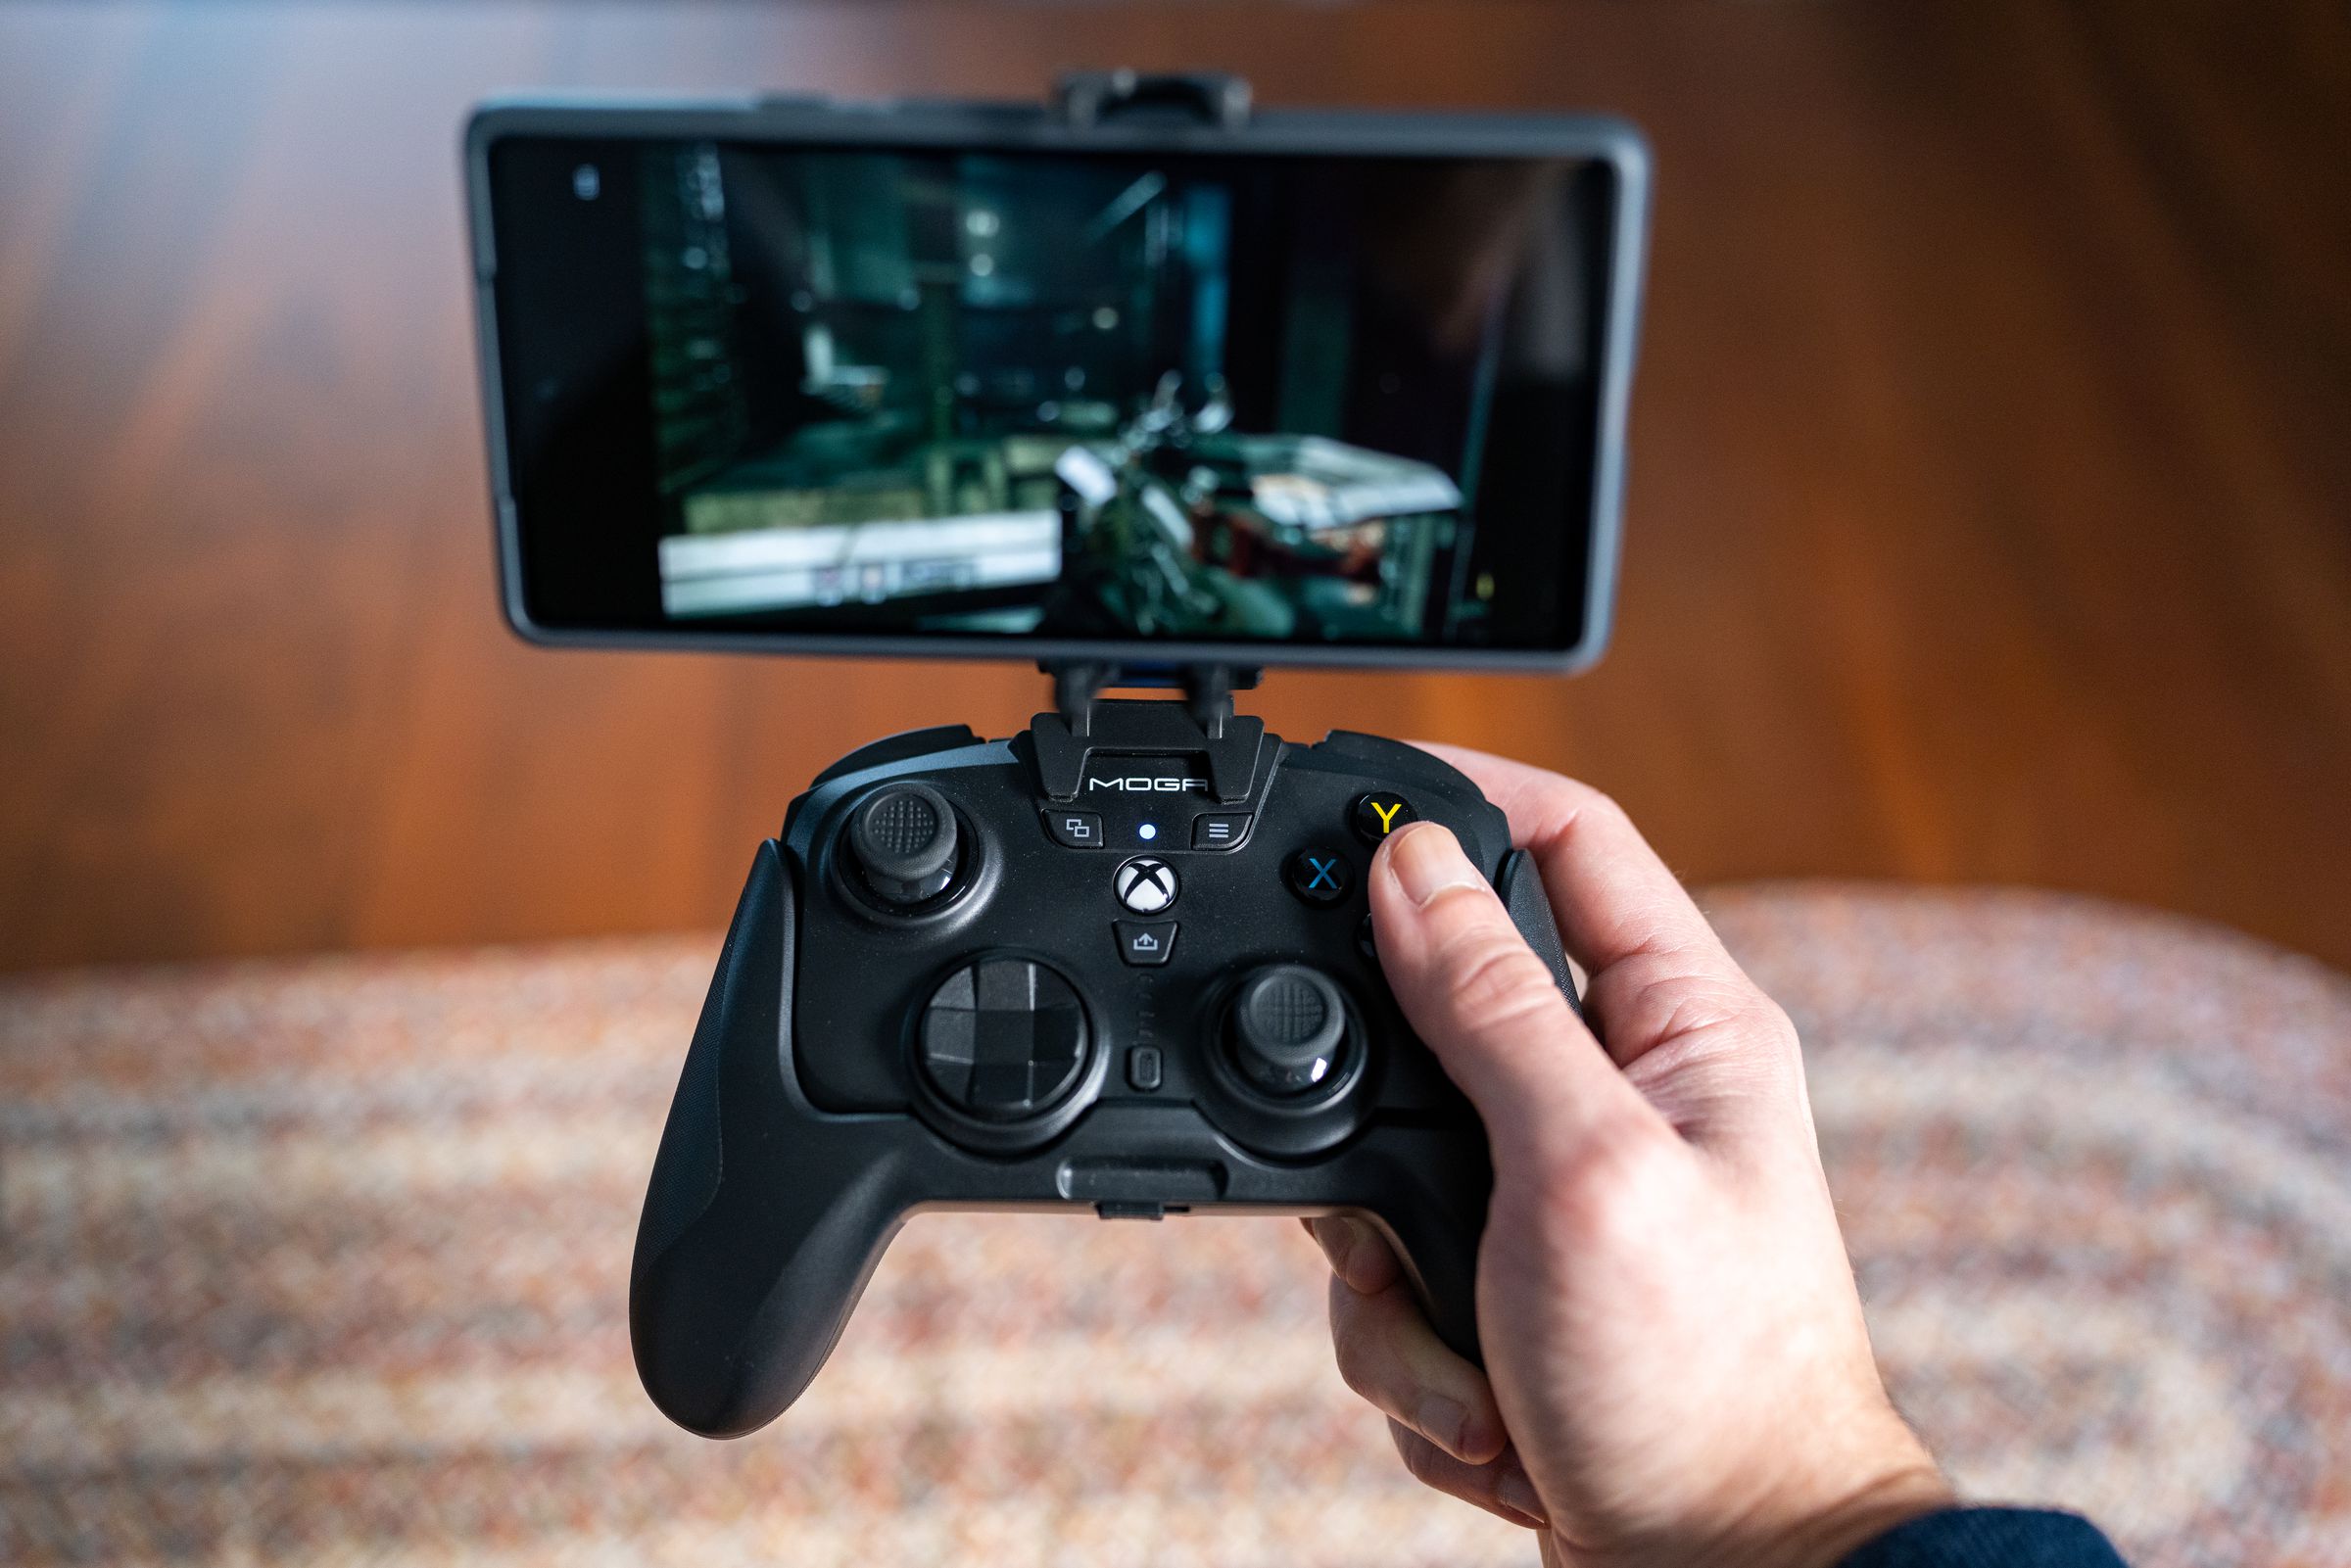 Due to the length of the attachable grip, when I move my thumb from stick to the buttons, it falls just short of my usual position — requiring a slight reach for the Y button.